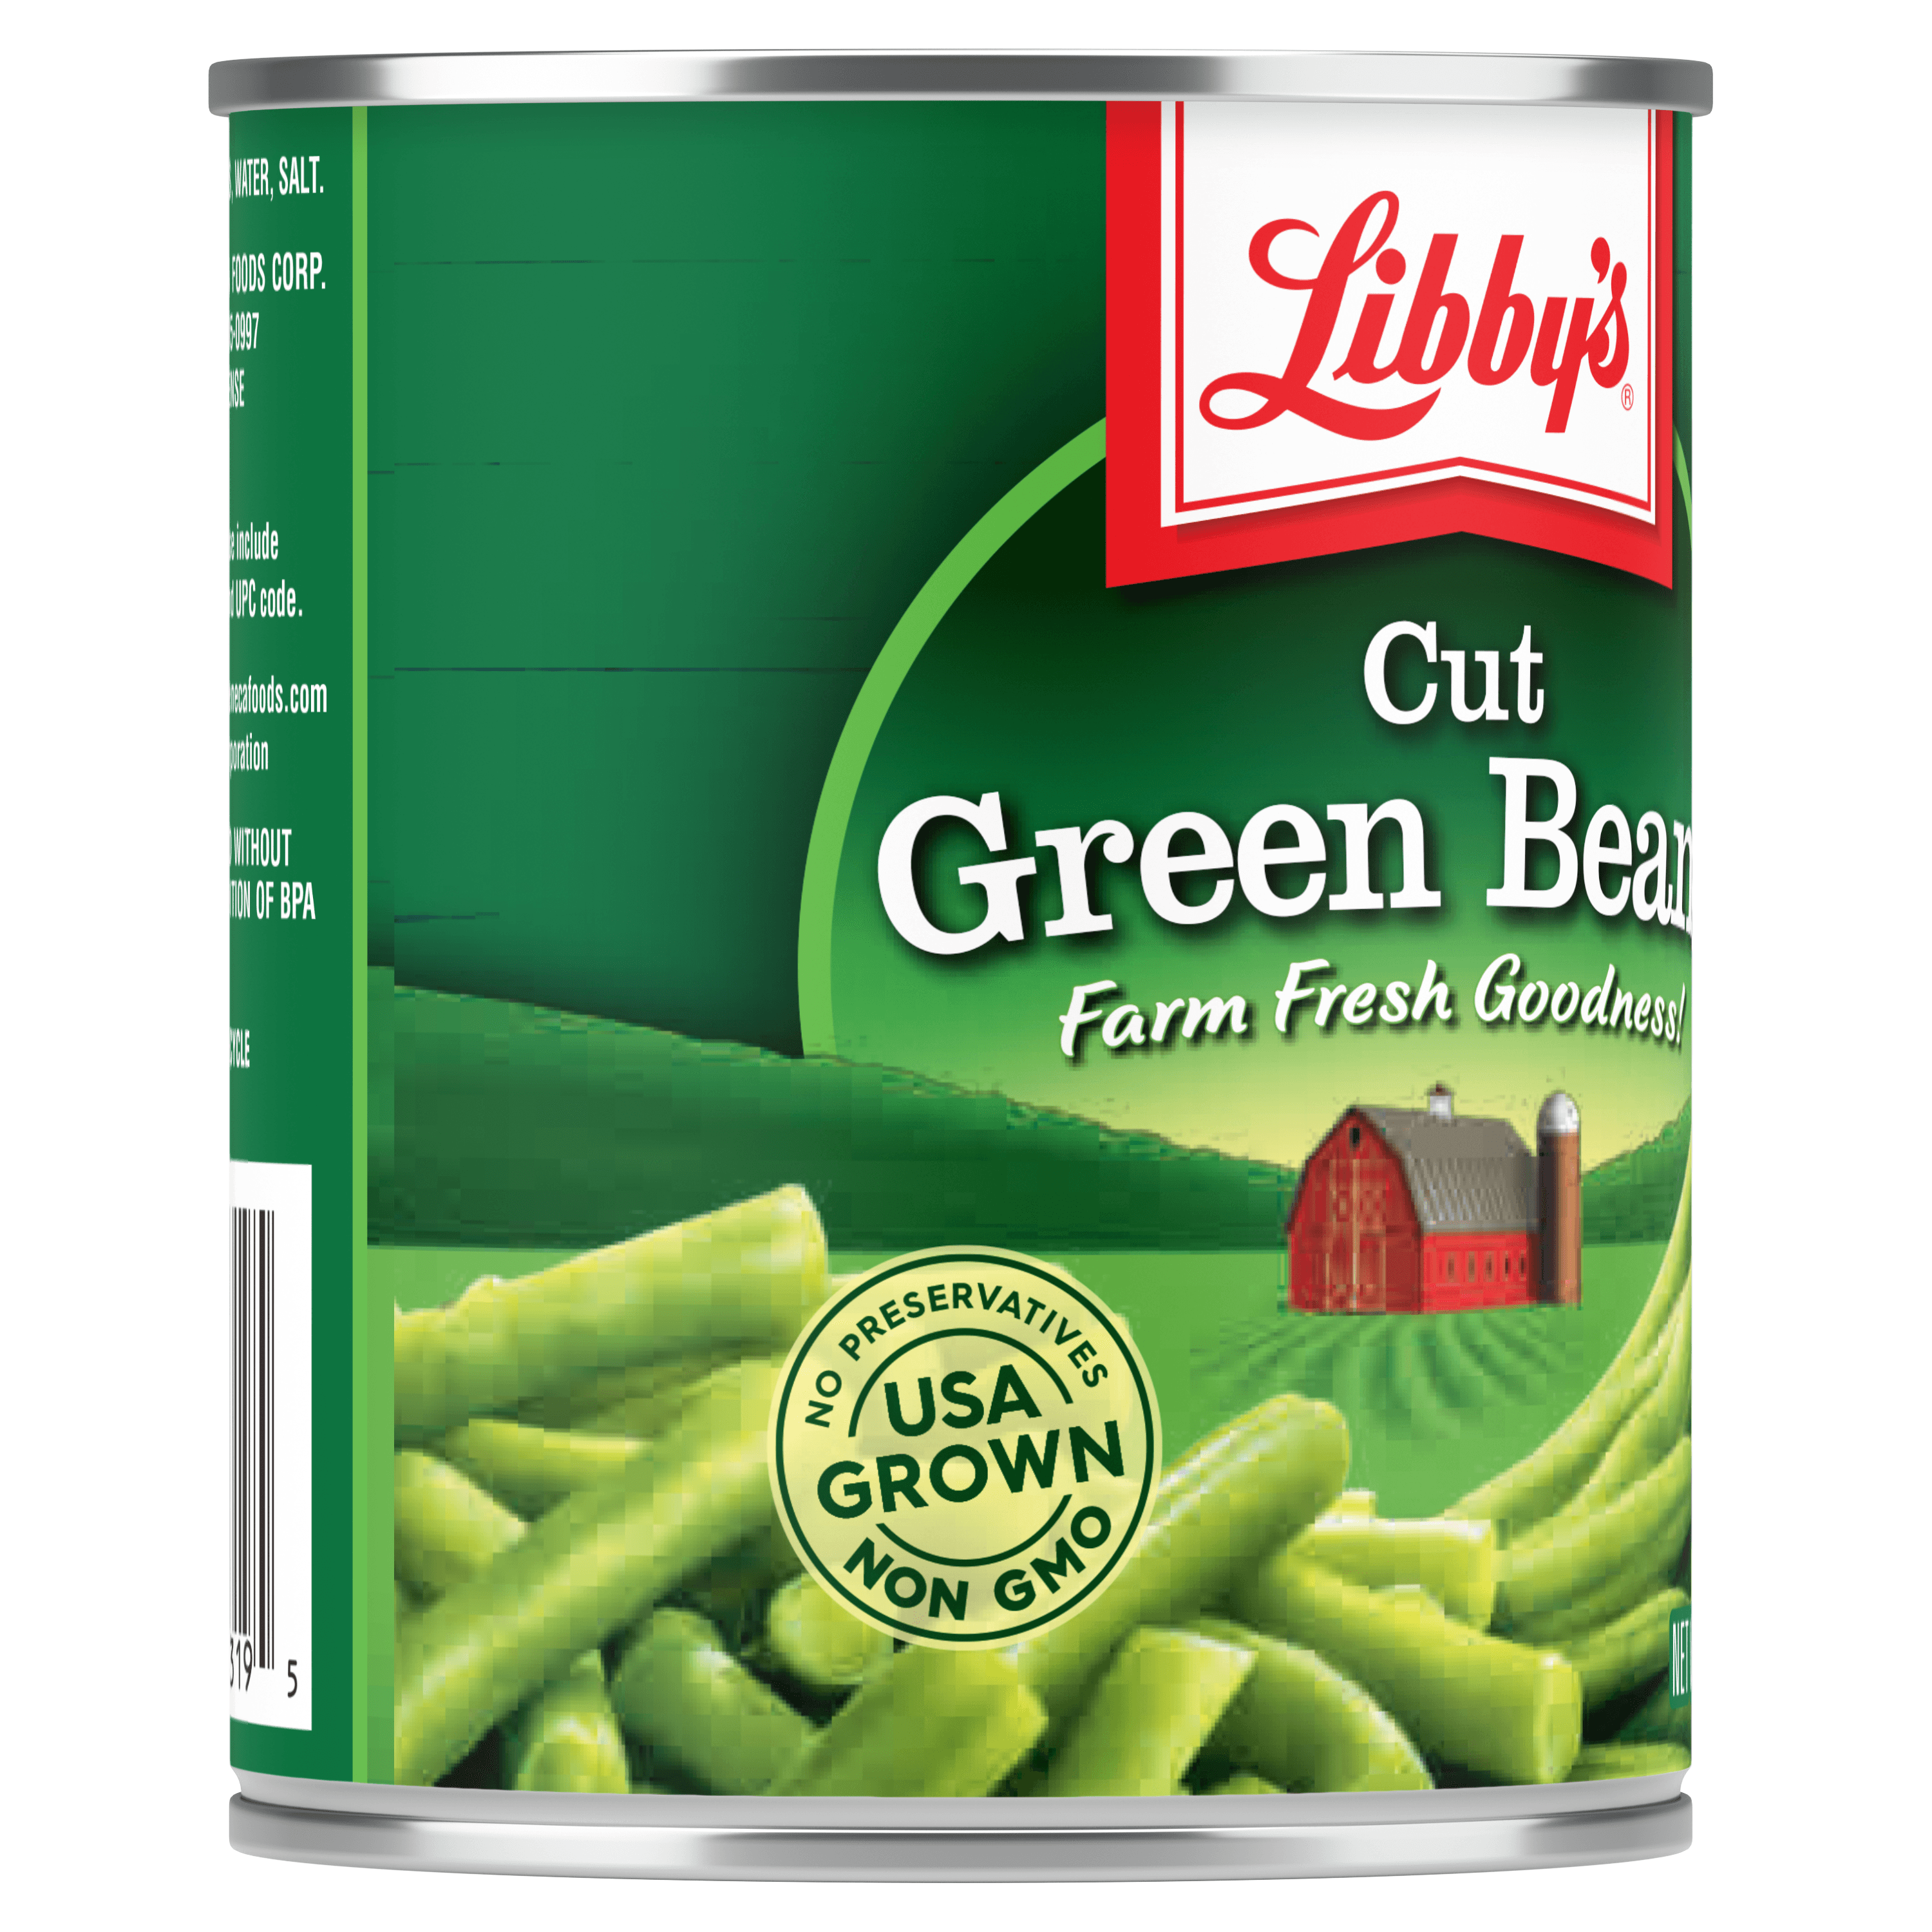 Libby's Cut Green Beans, 8 oz. Can, Canned Green Beans left panel of label showing USA Grown, No Preservatives and Non GMO information